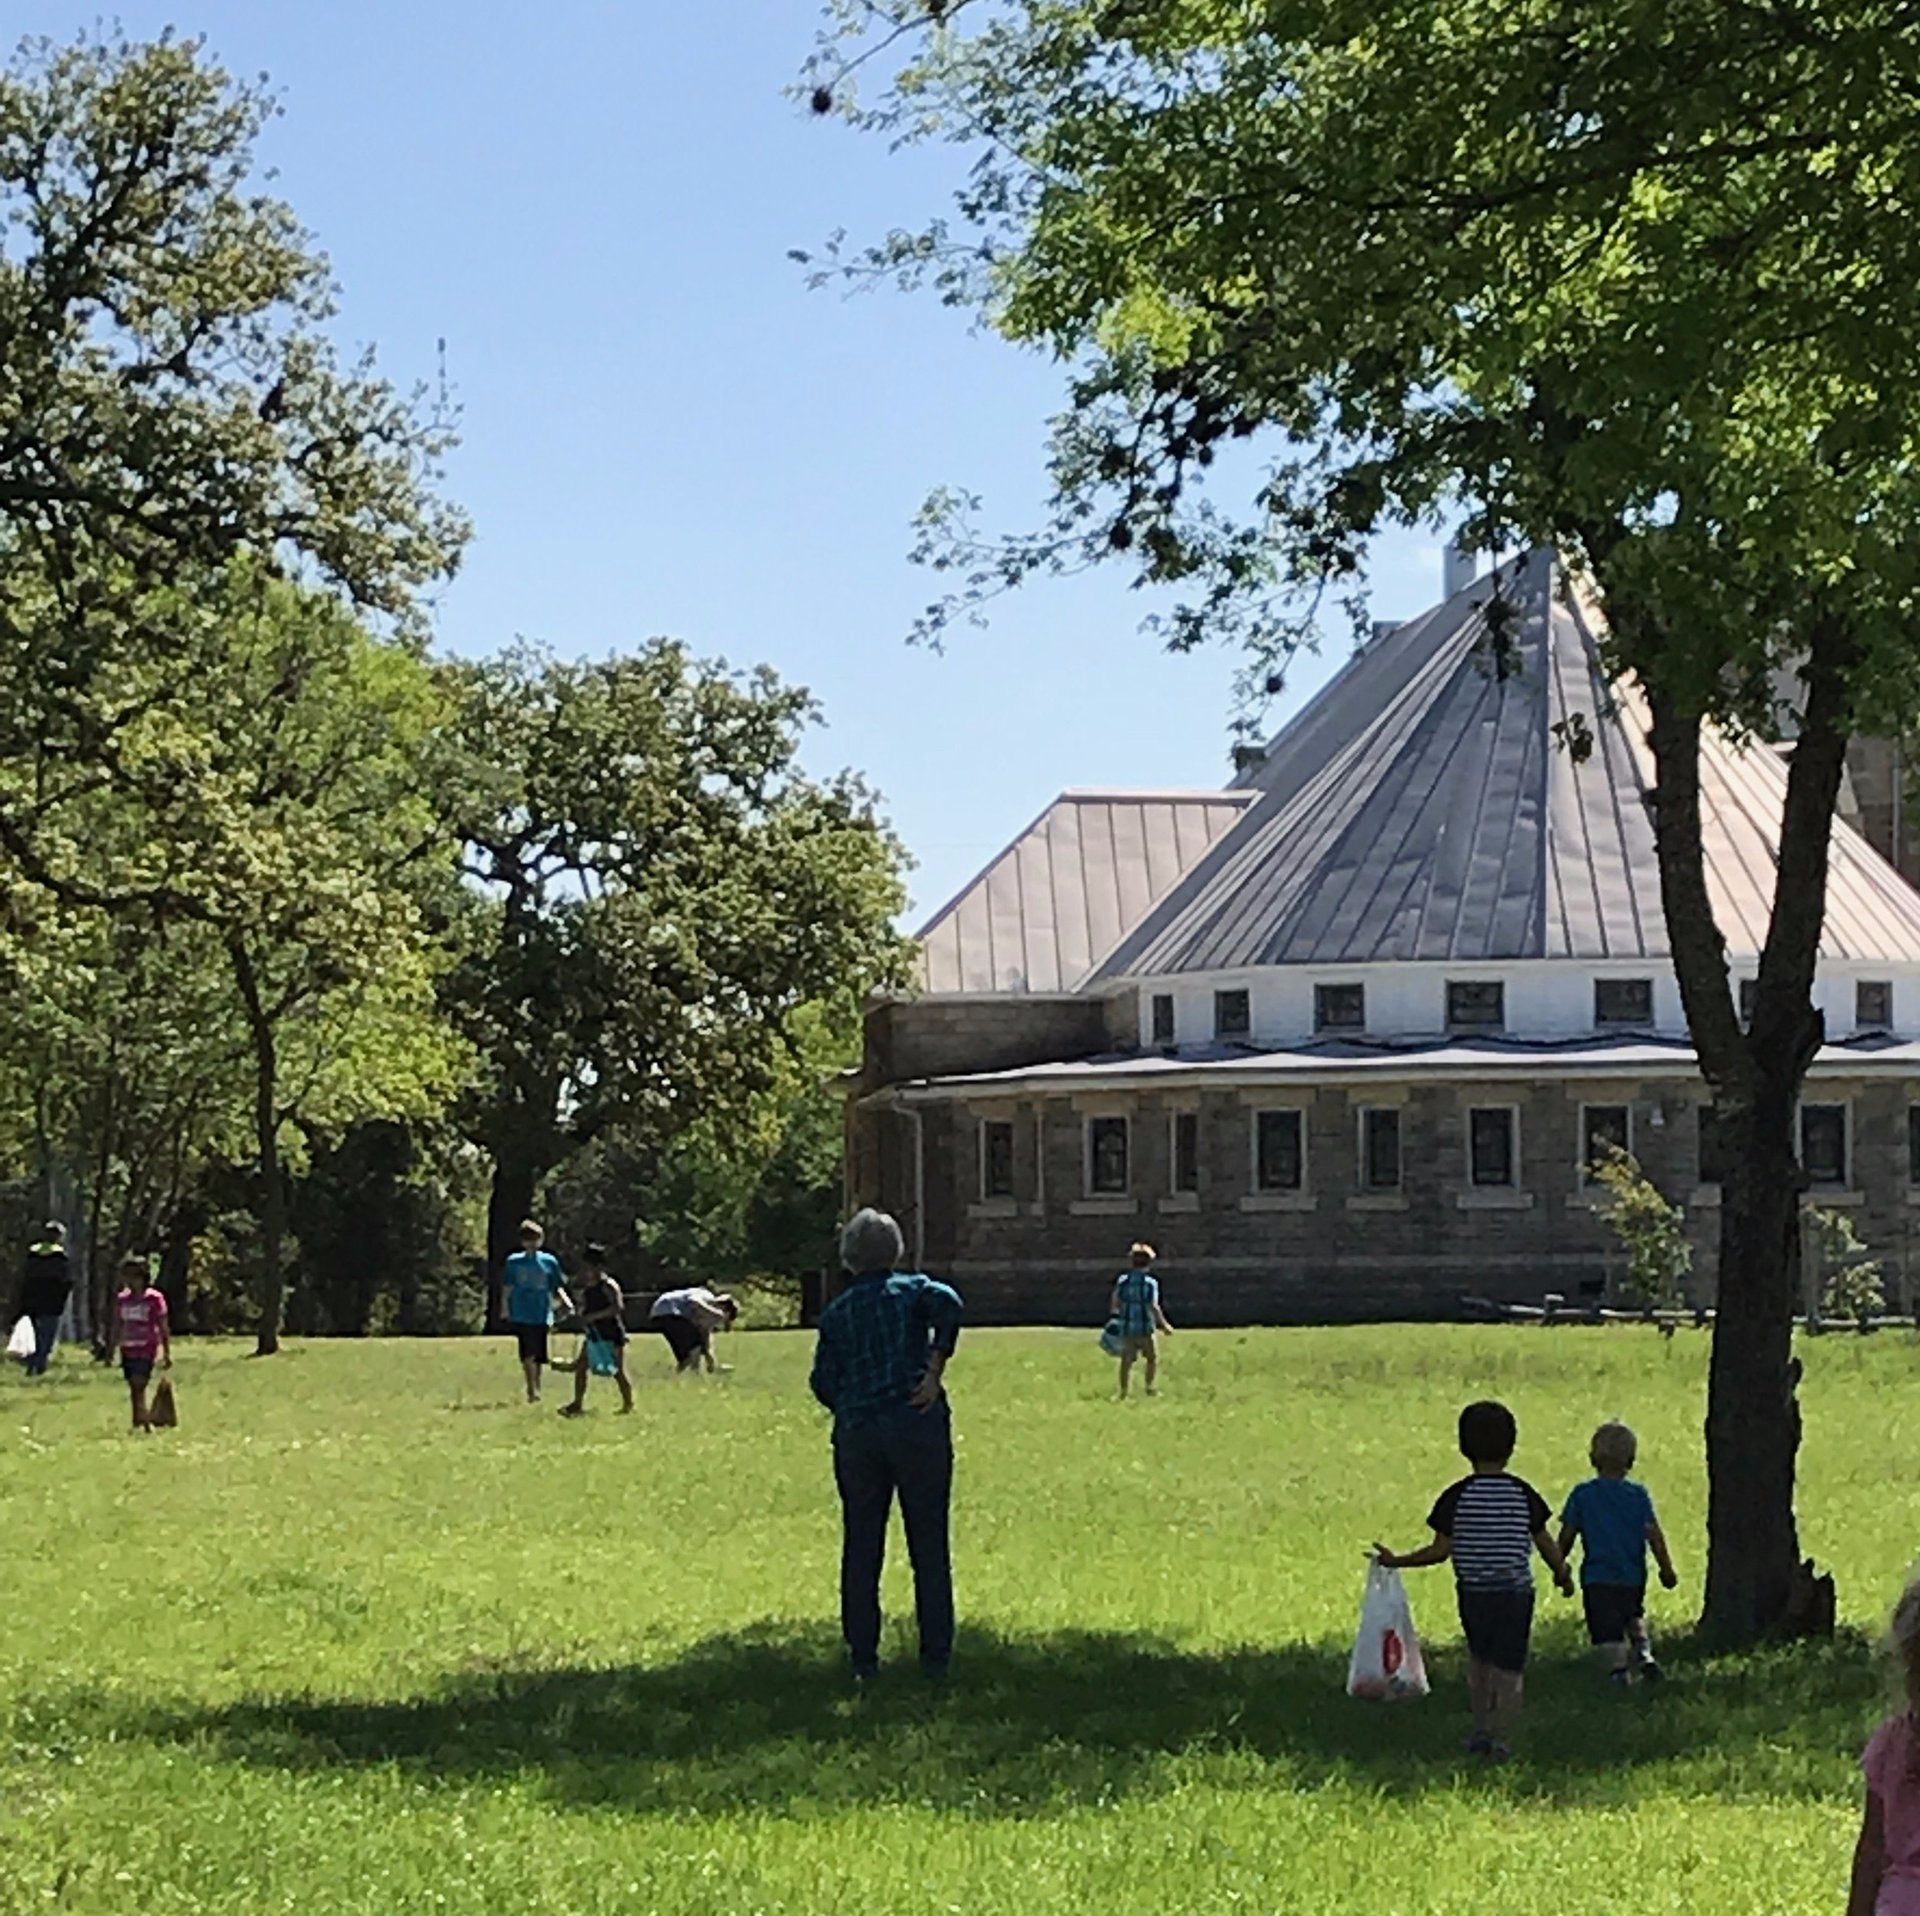 children in a grassy field in front of a gothic style church